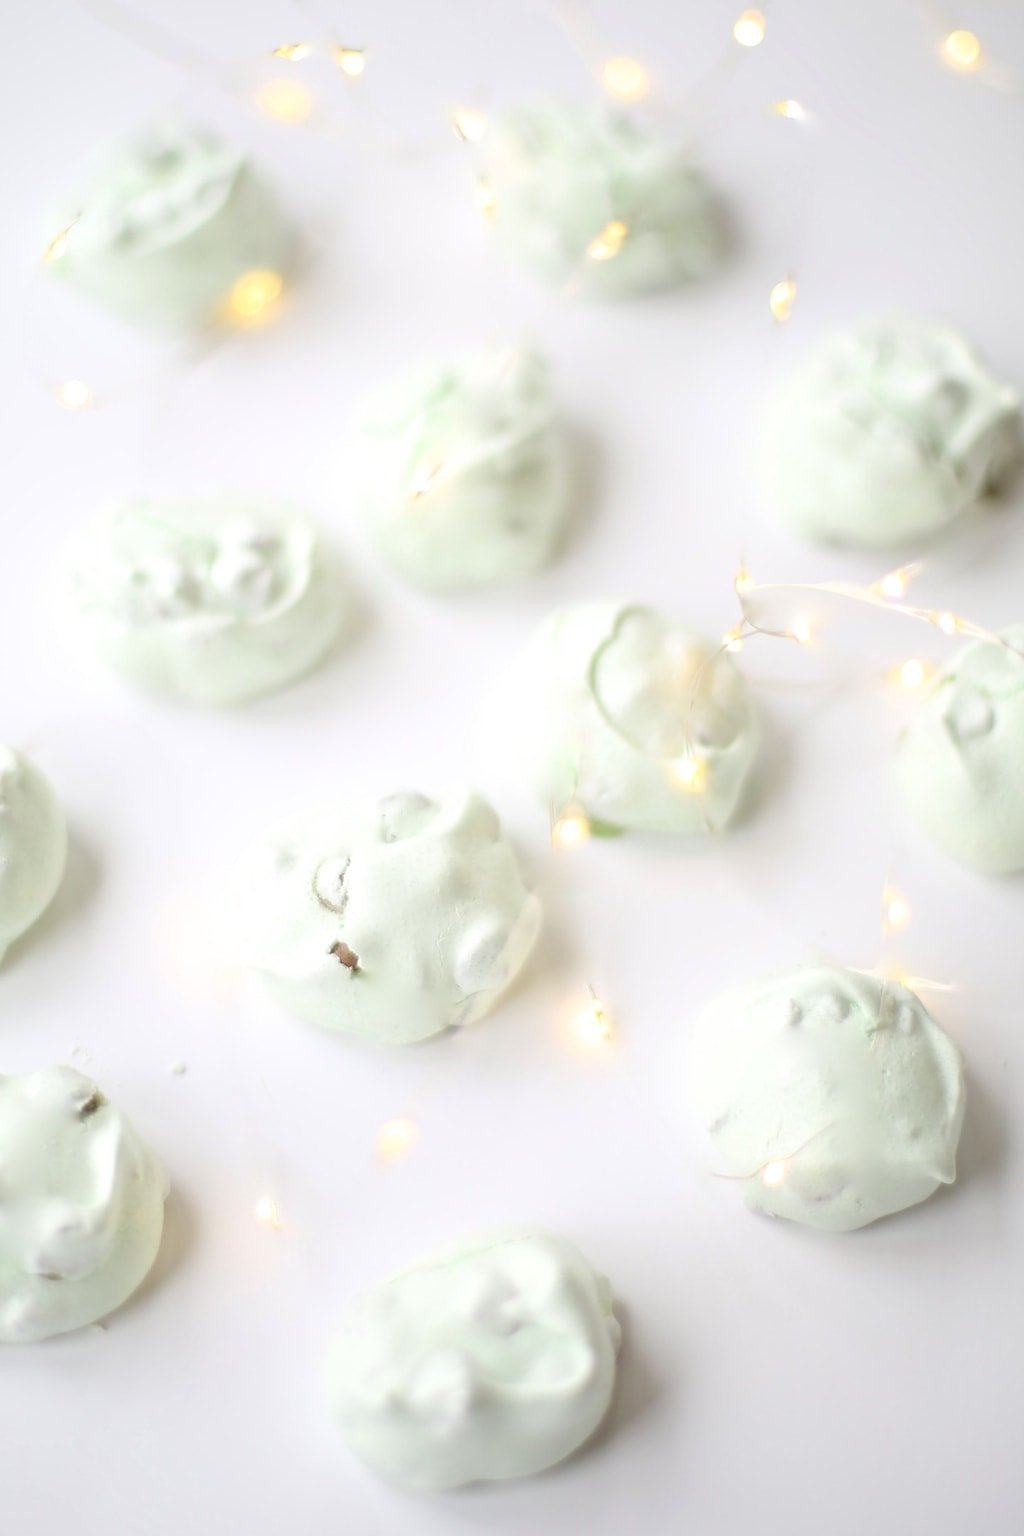 three ingredient meringue cookies with chocolate chips on white surface